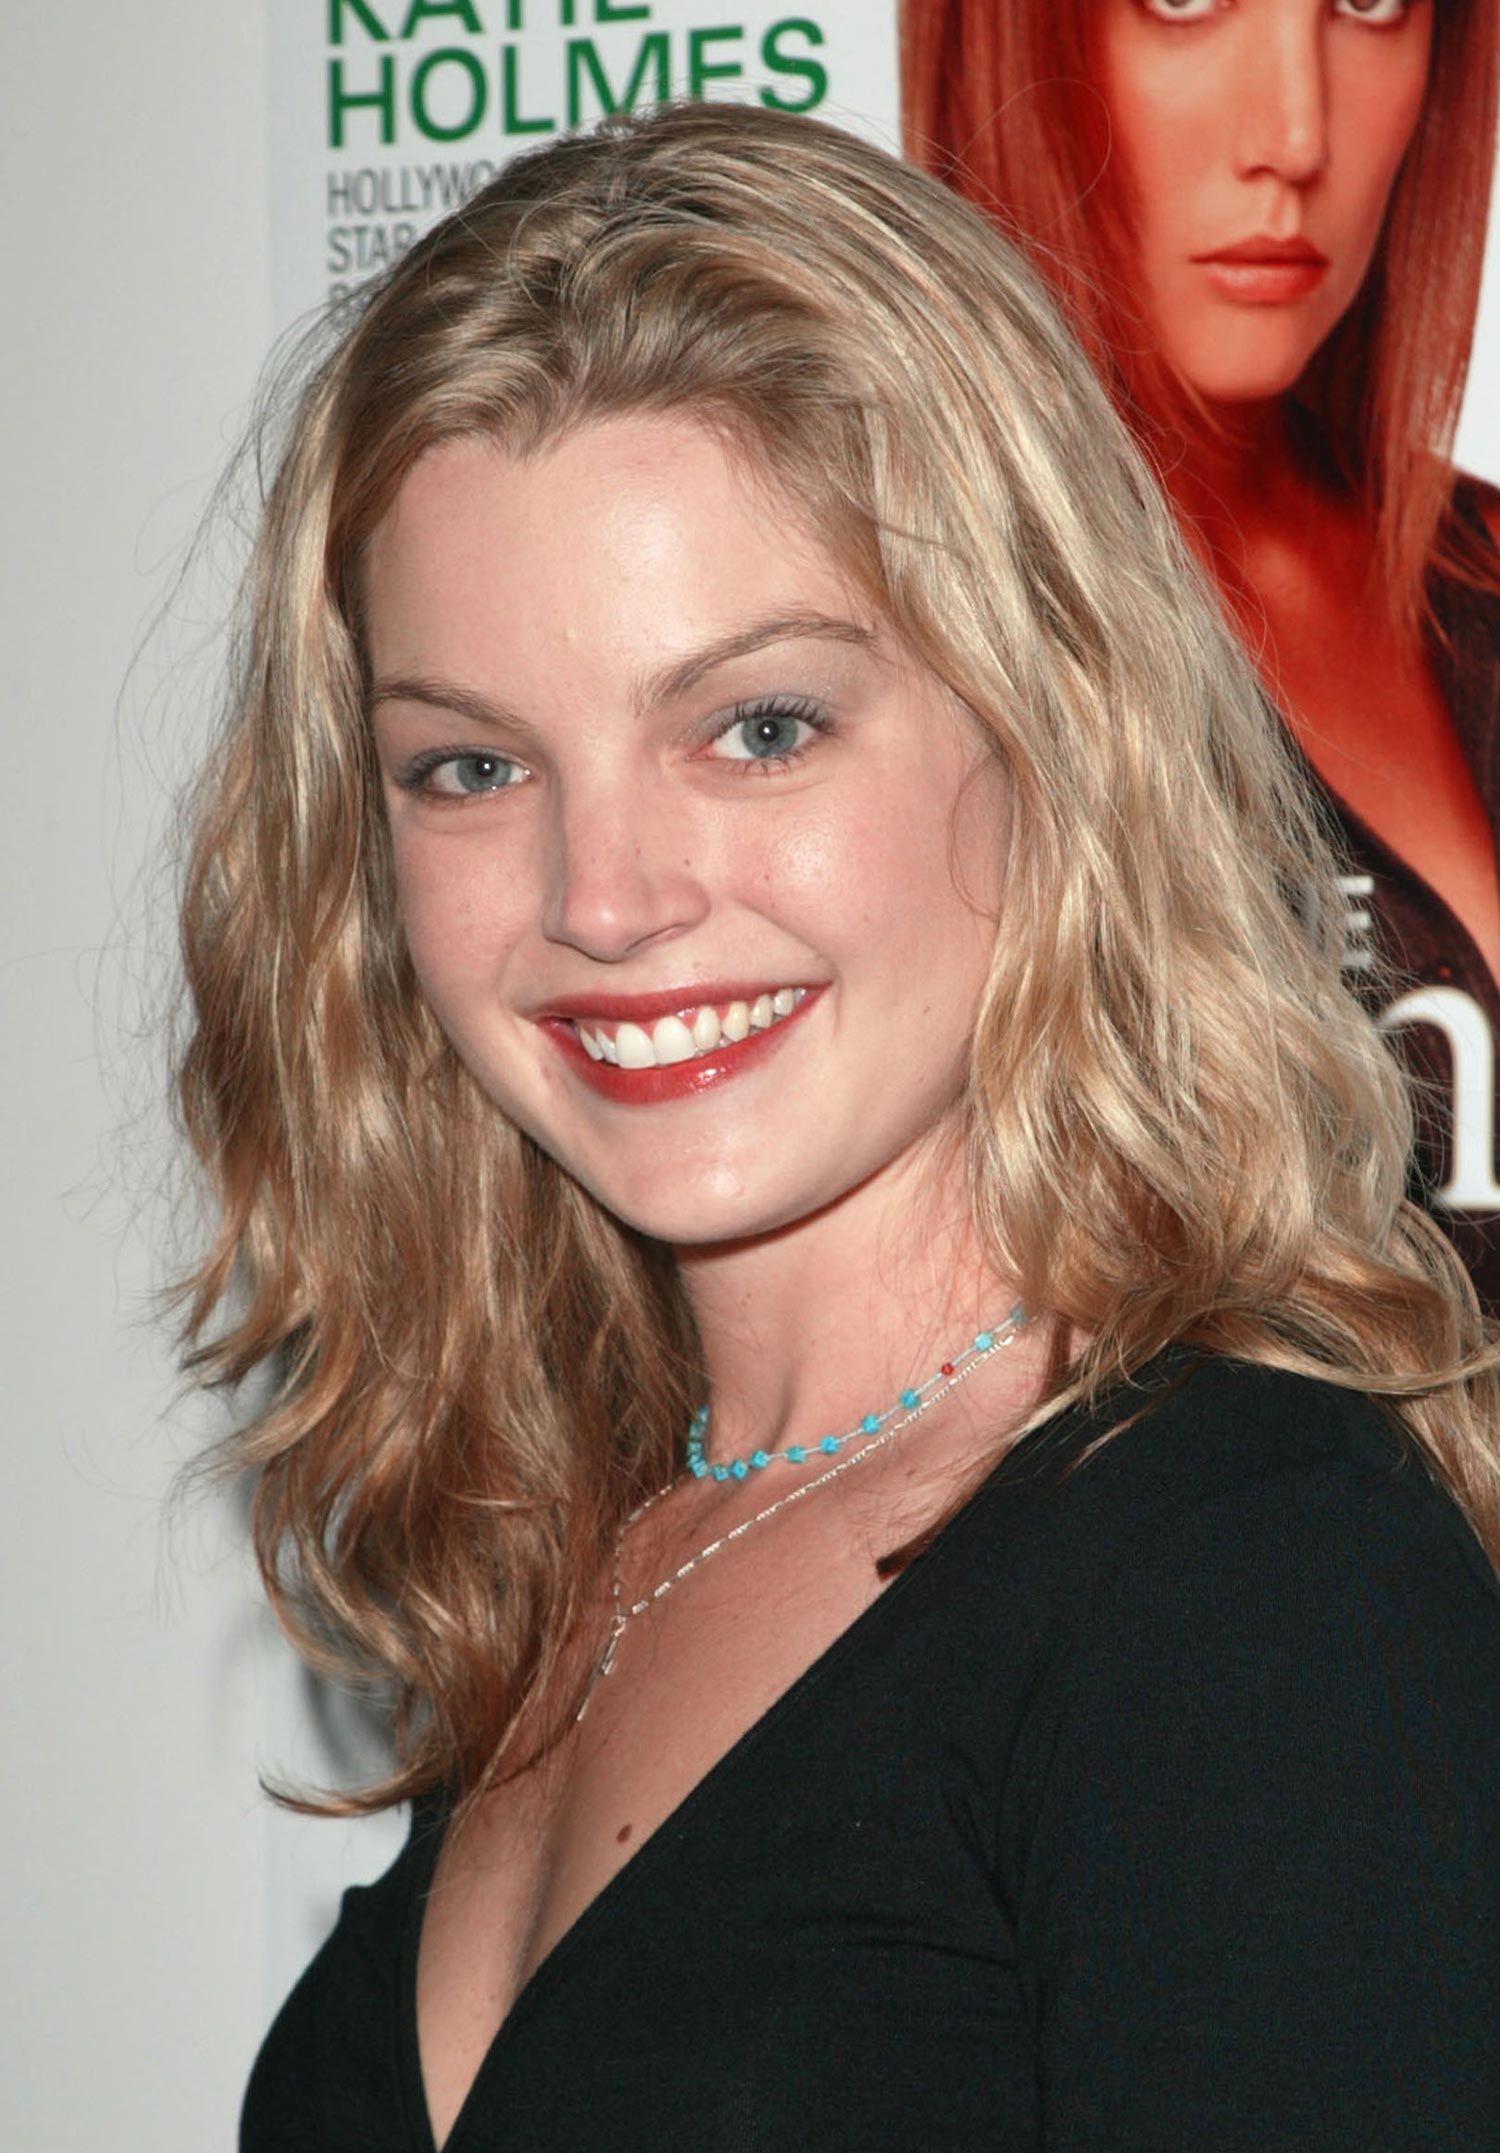 clare-kramer-movieline-hollywood-style-hall-of-fame-hq-02-1500.jpg